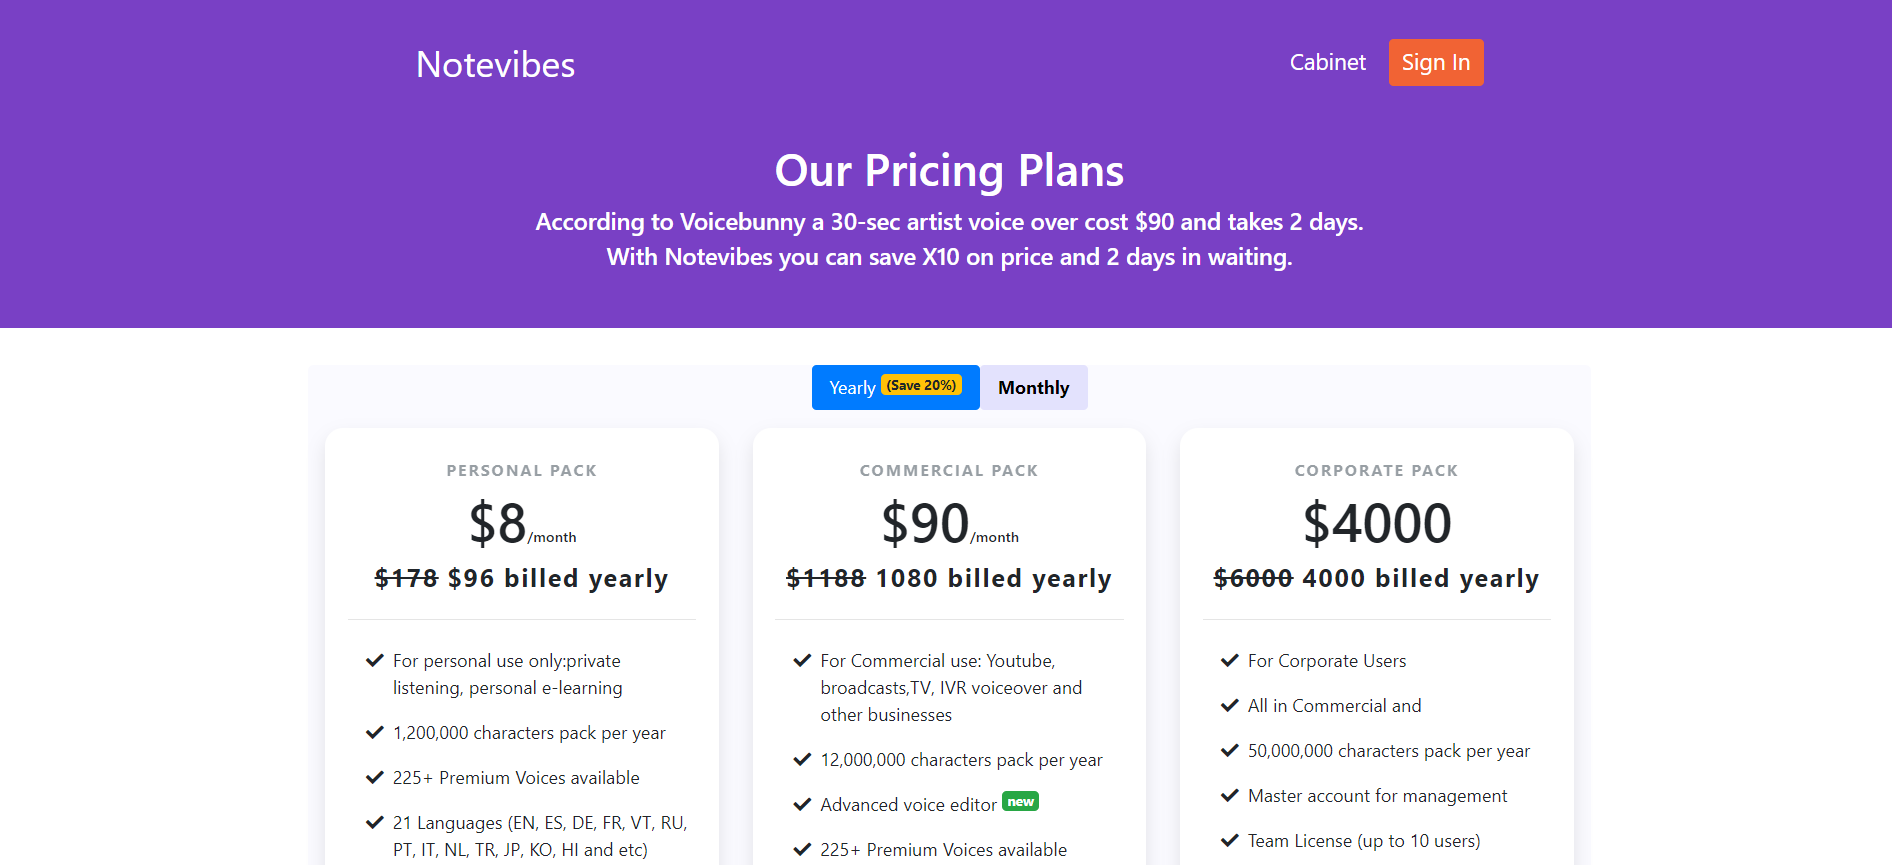 Notevibes Pricing